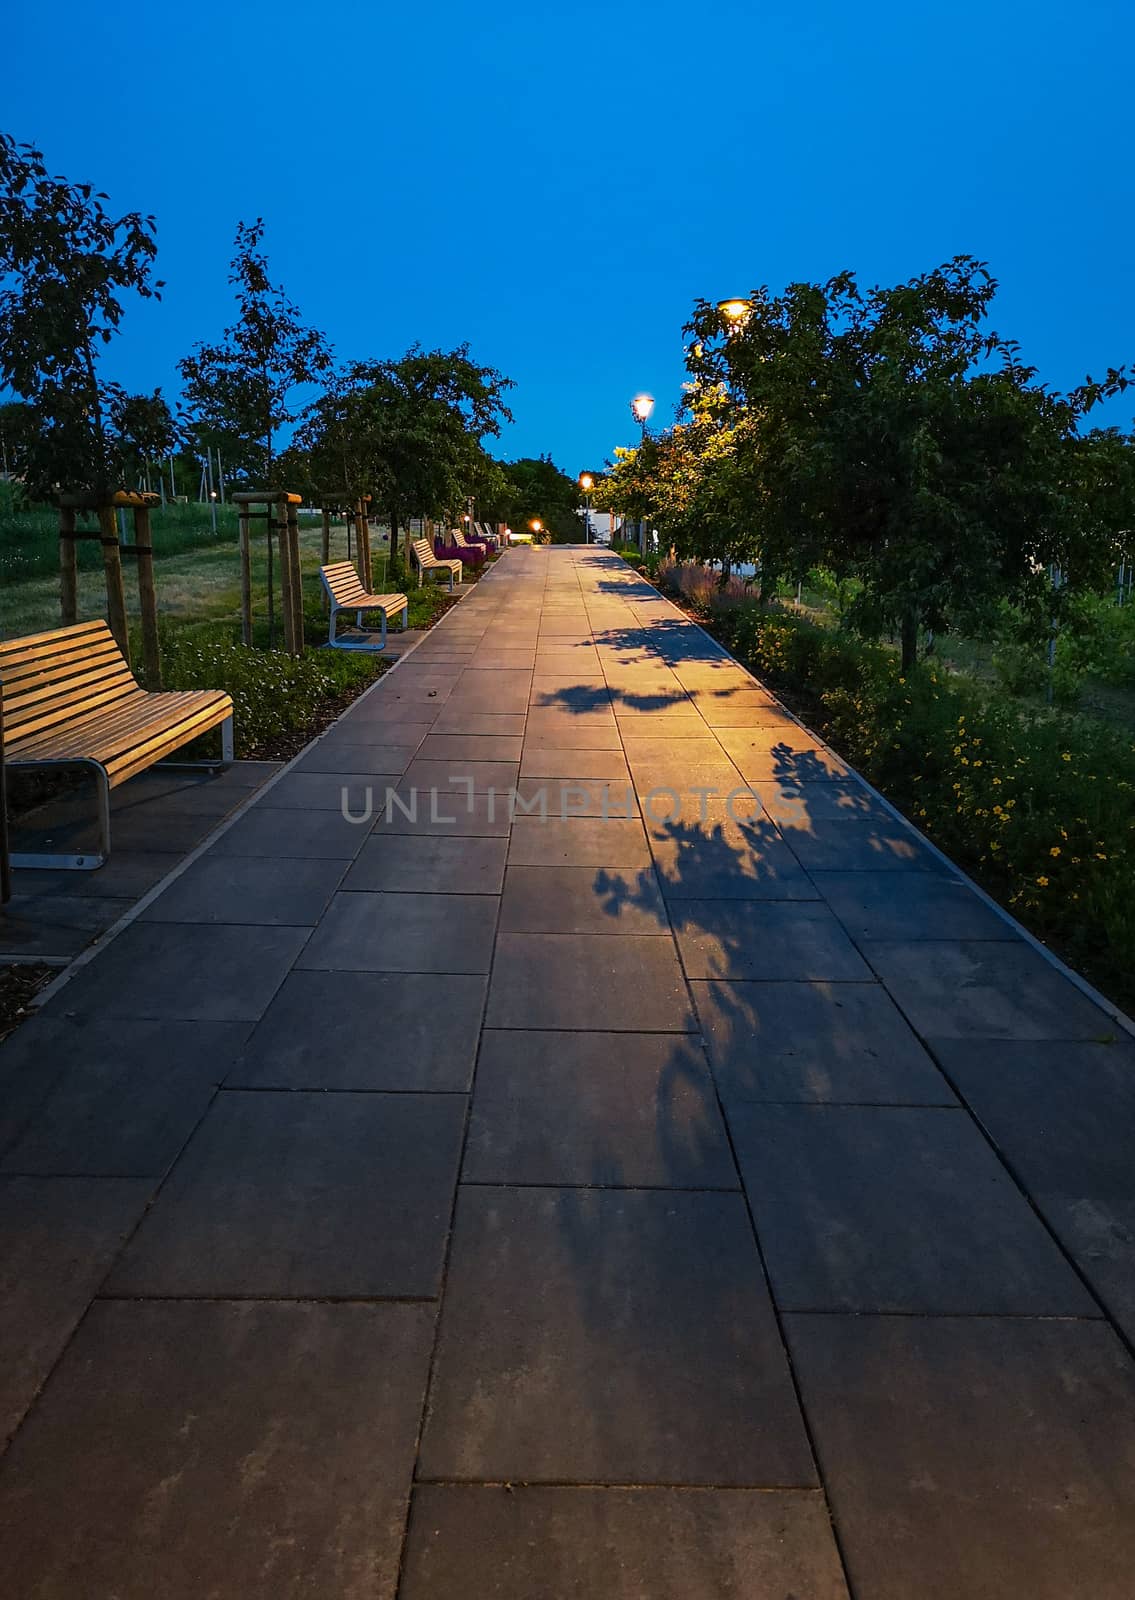 Long sidewalk path with concrete tiles between lanterns, benches and trees